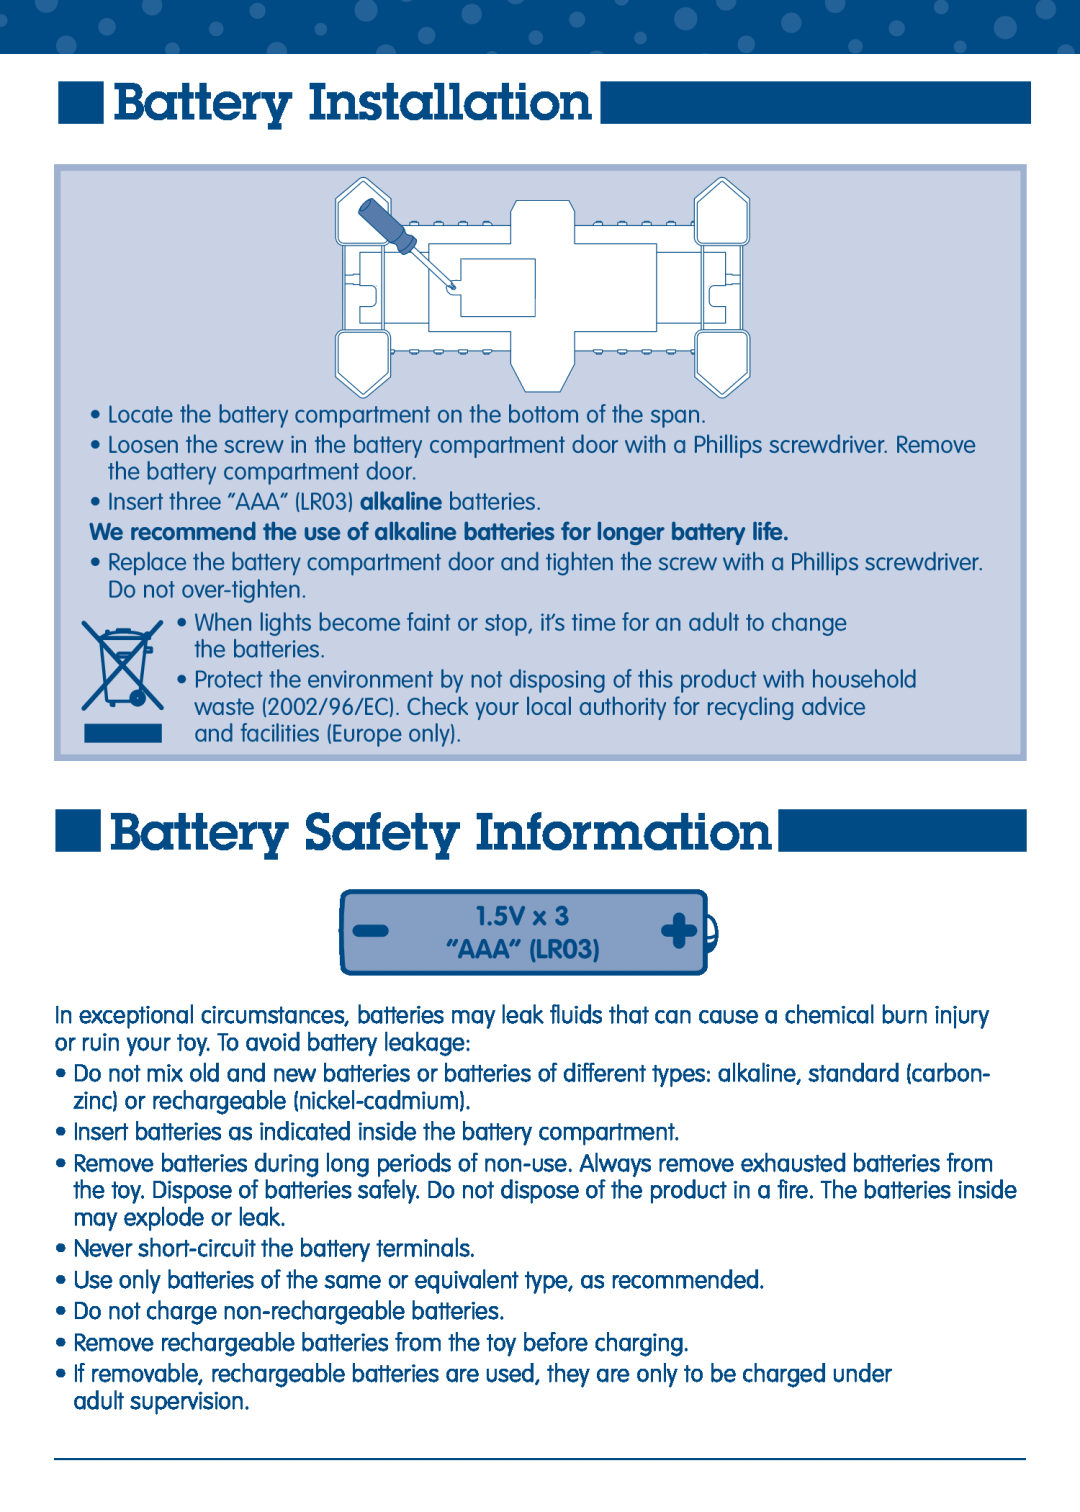 Fisher-Price L5895 manual Battery Installation, Battery Safety Information, 1.5V x “AAA” LR03 